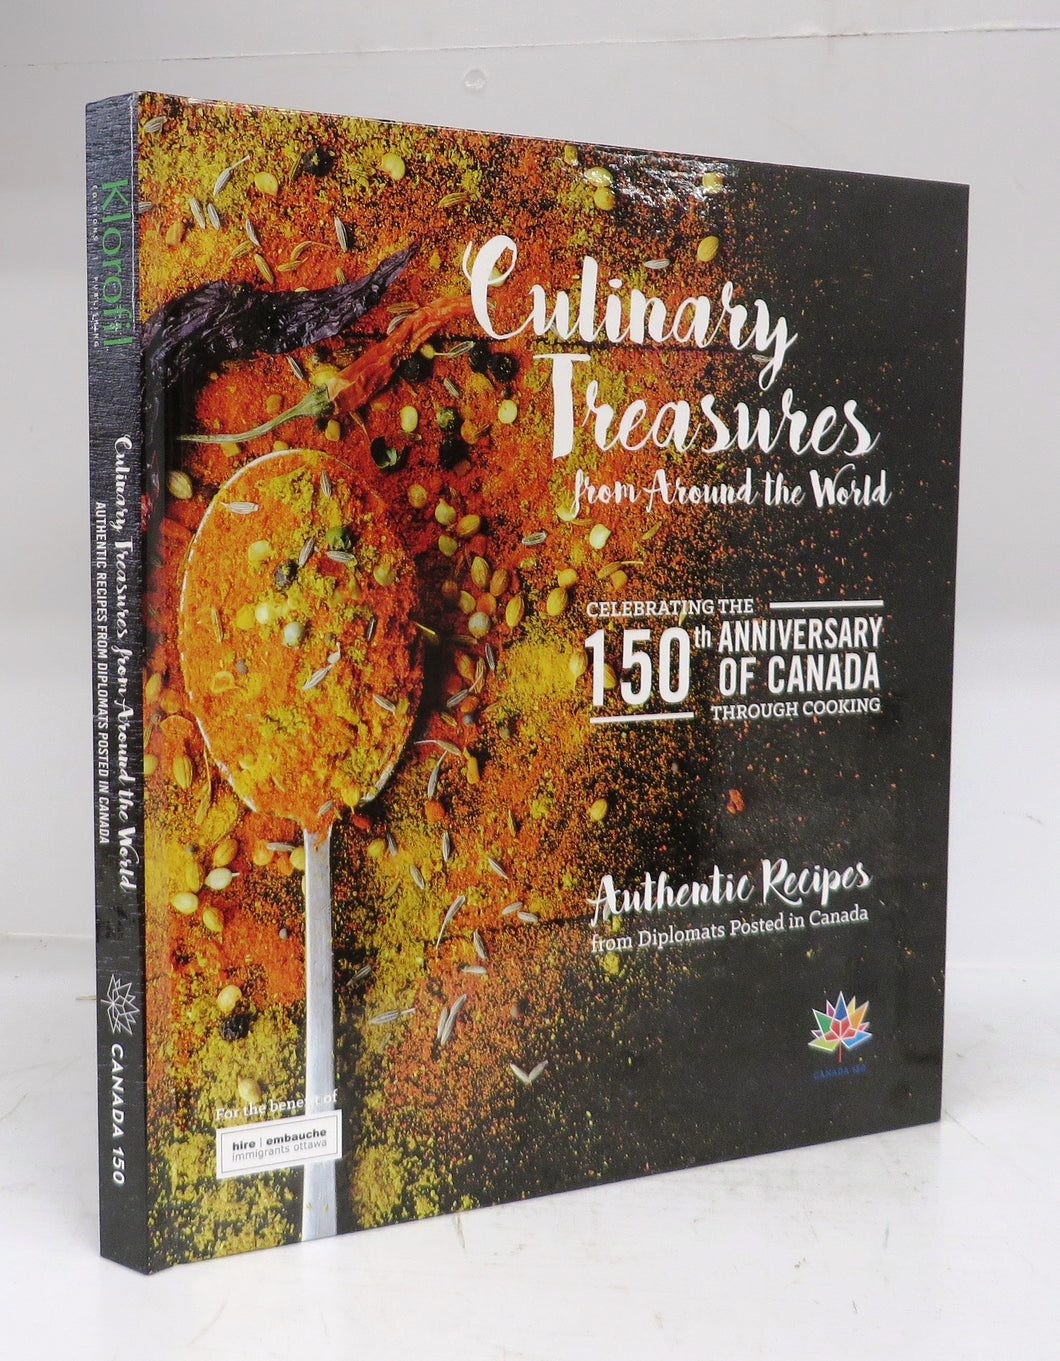 Culinary Treasures from Around the World: Authentic Recipes from Diplomats Posted in Canada